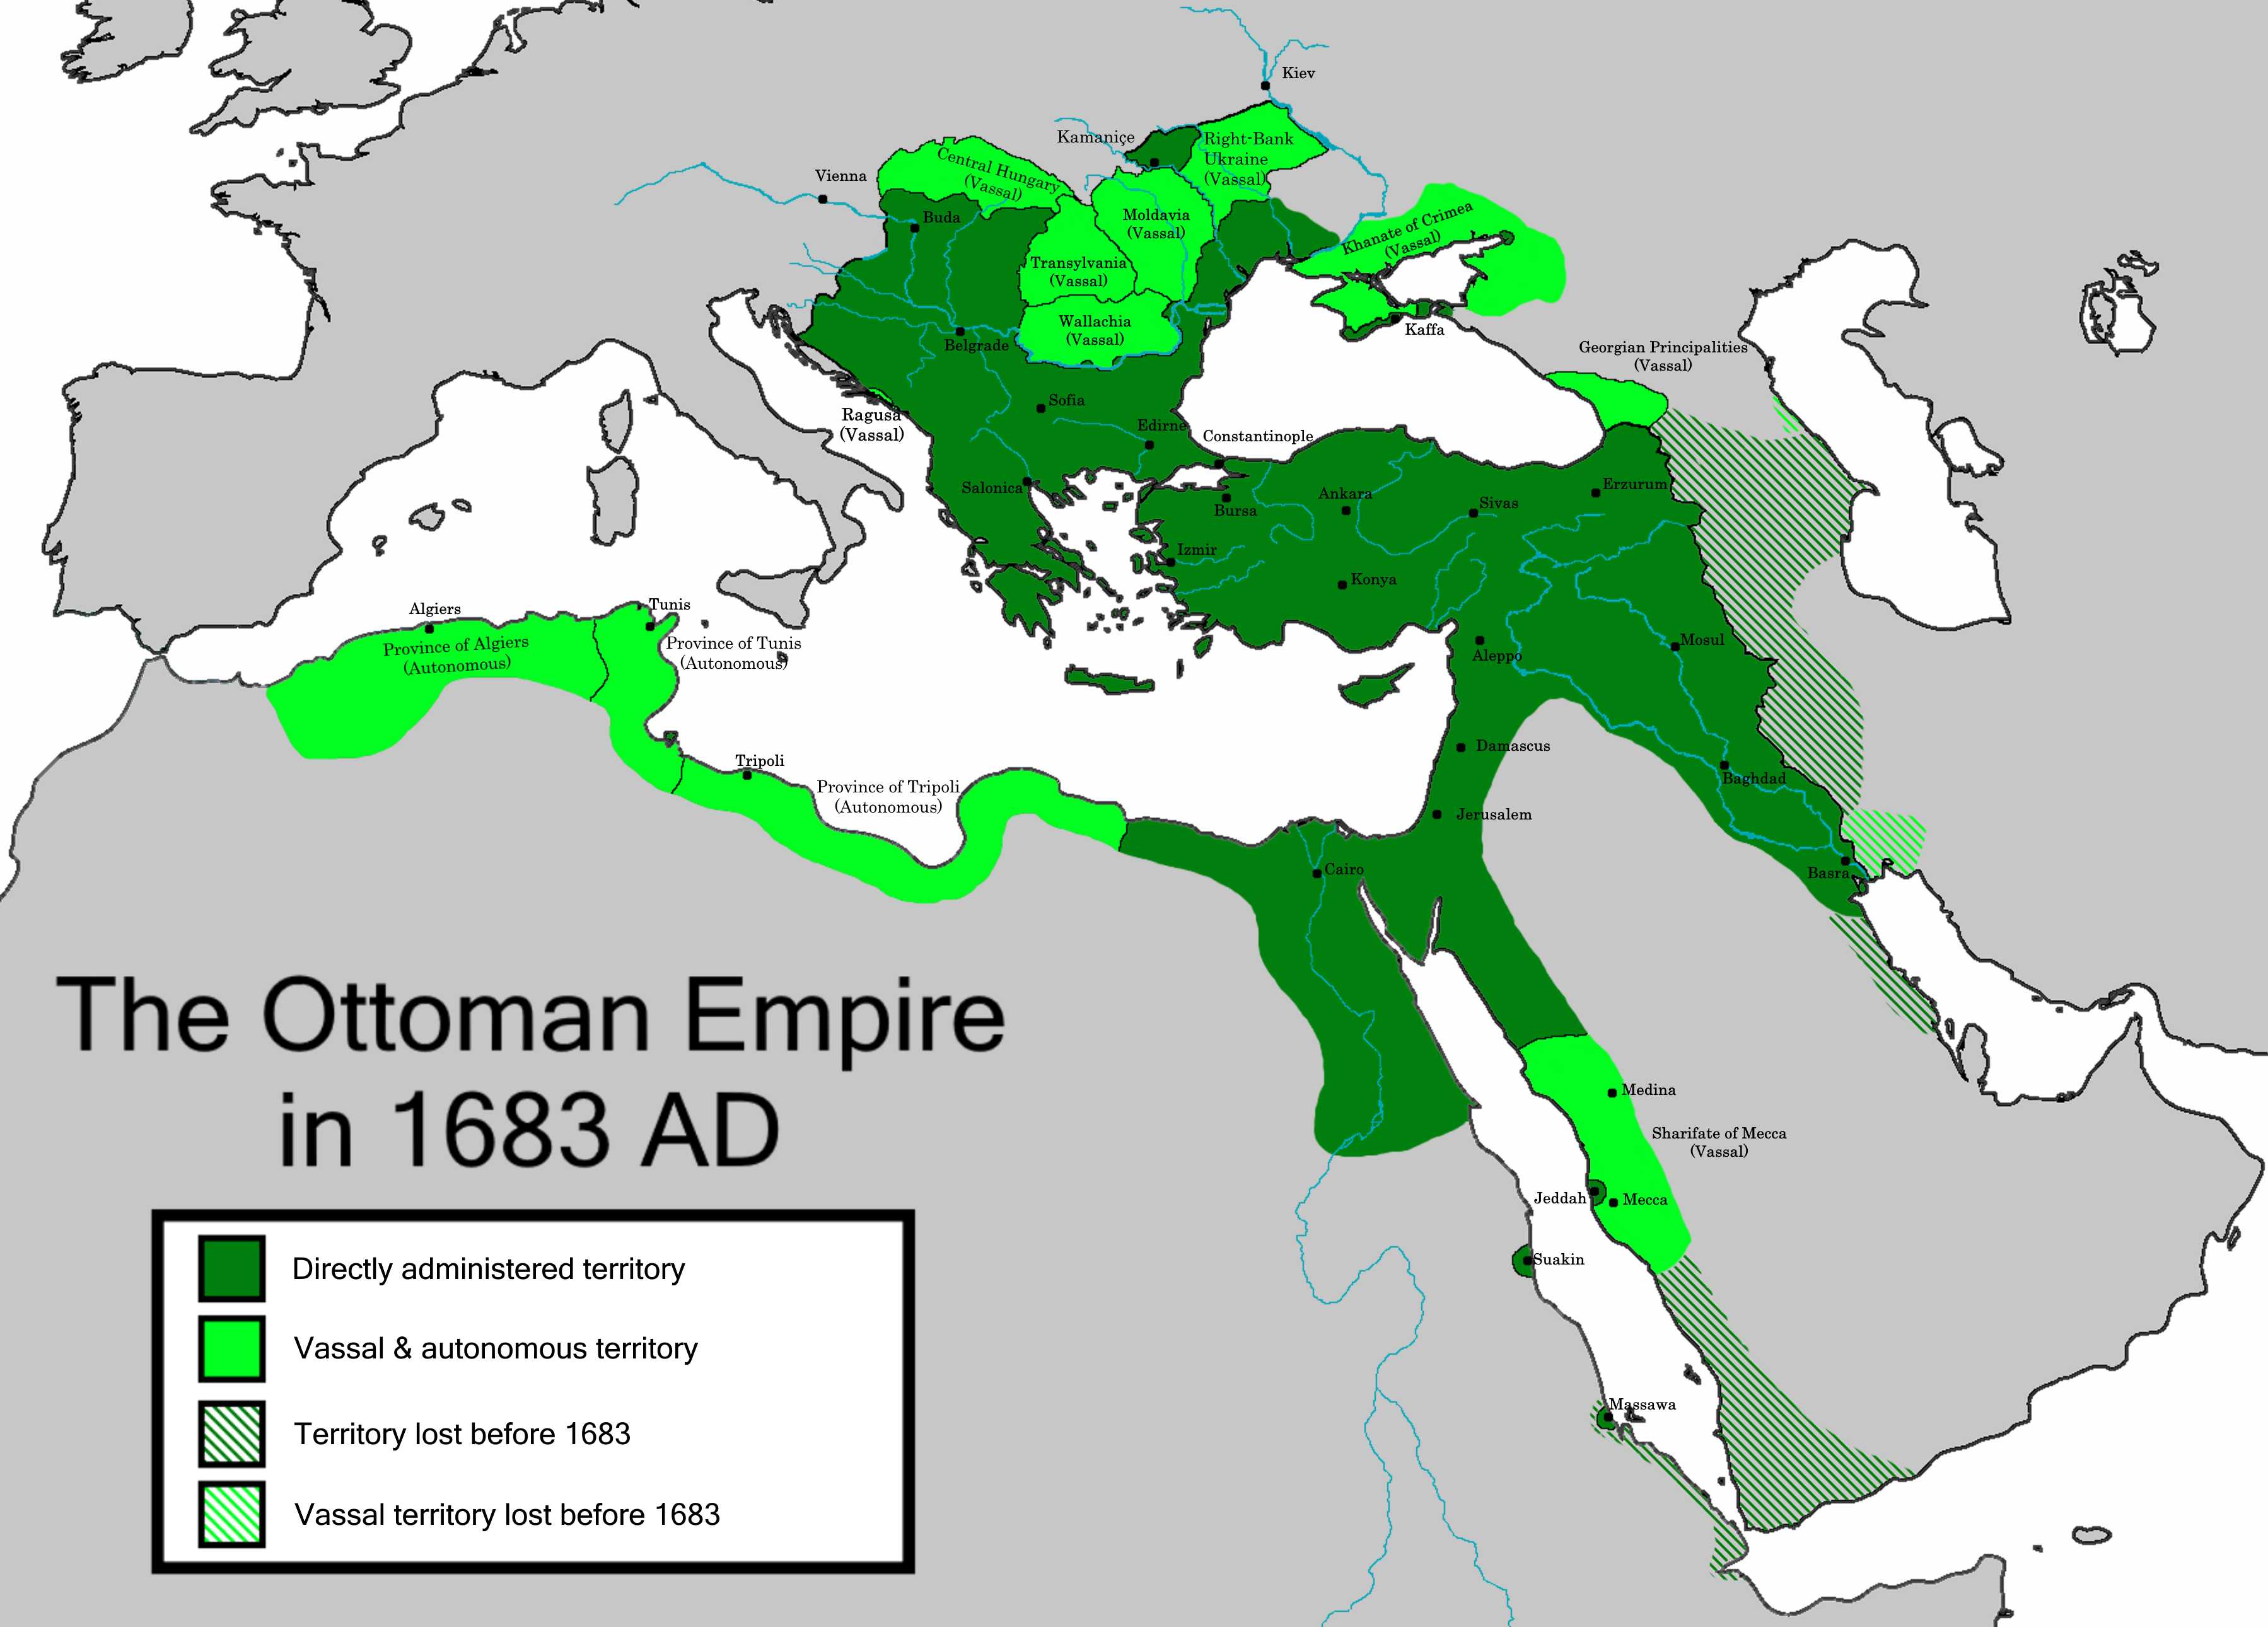 The Greatest Extent of Ottoman Empire.jpg